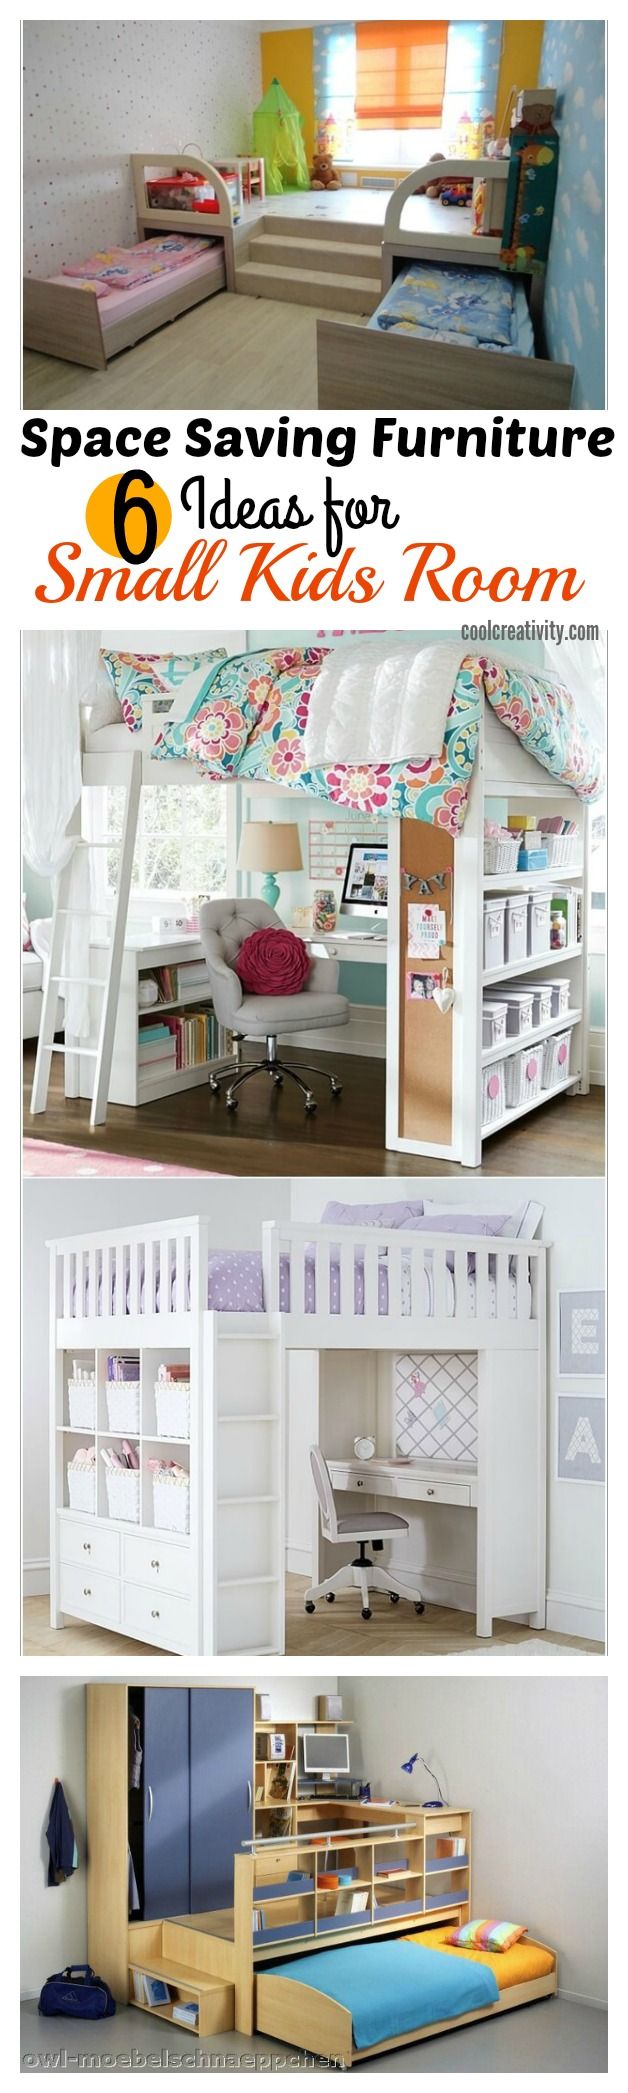 6 Space Saving Furniture Ideas for Small Kids Room